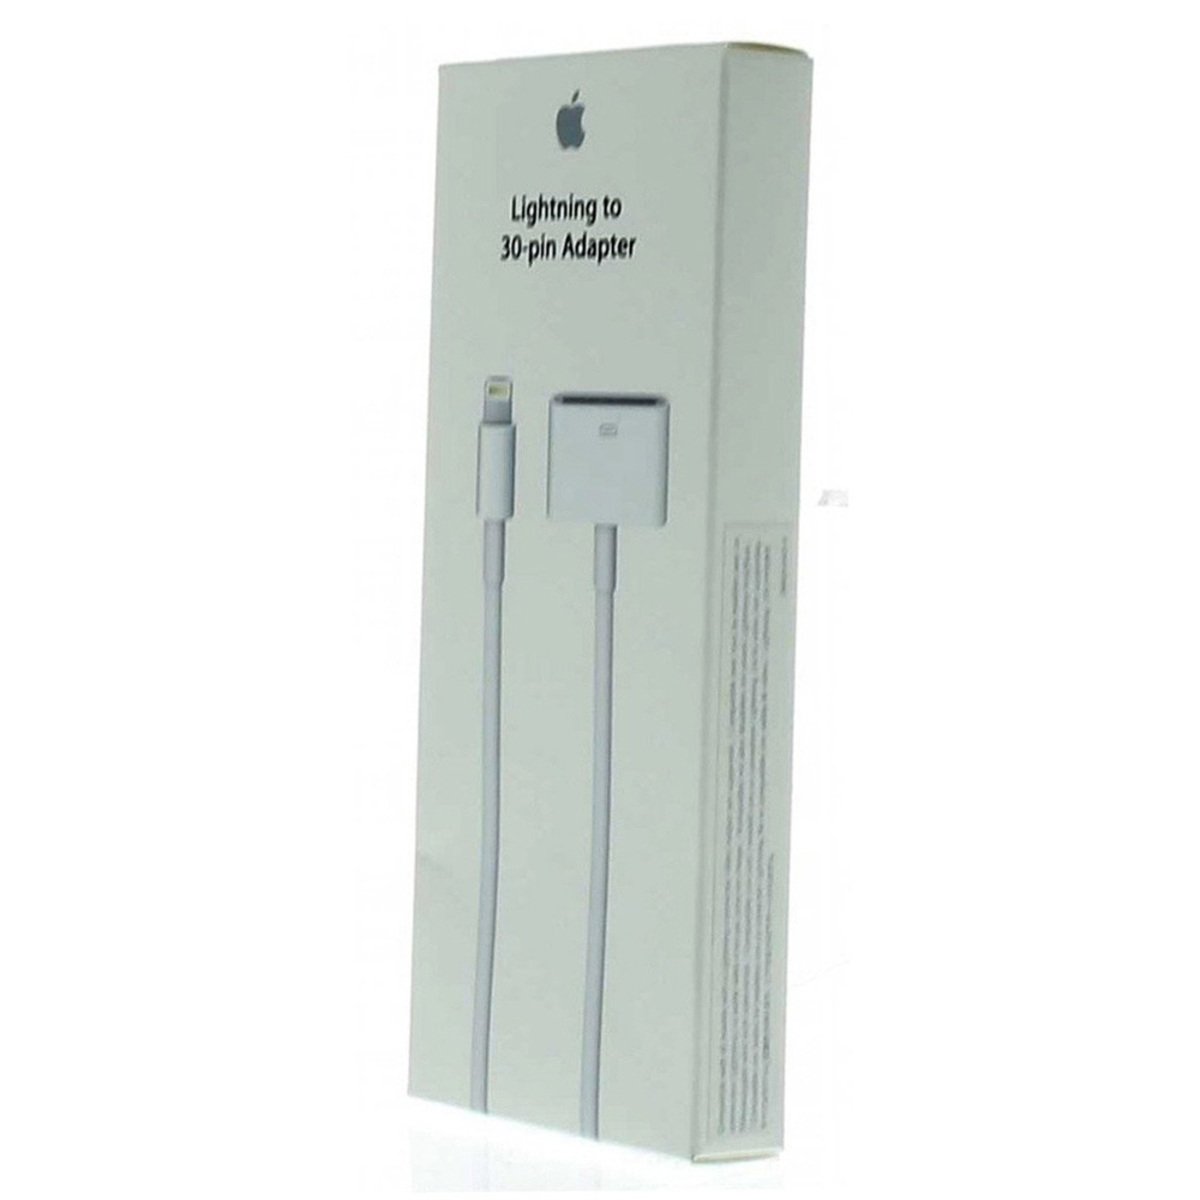 Apple Lightning To 30-pin Adapter MD824